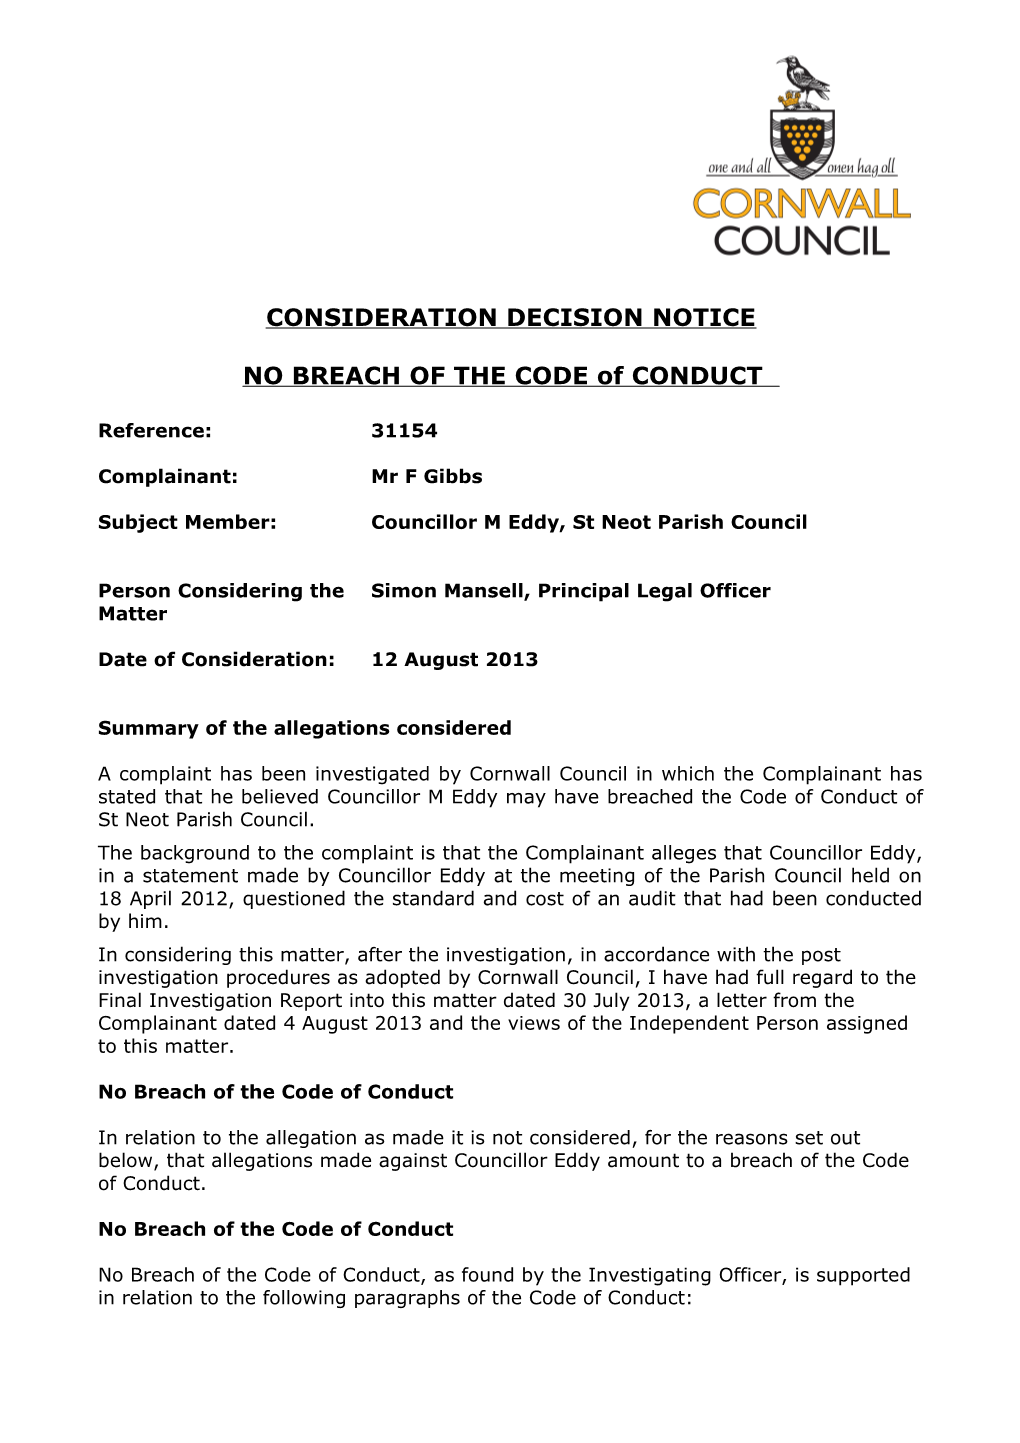 NO BREACH of the CODE of CONDUCT